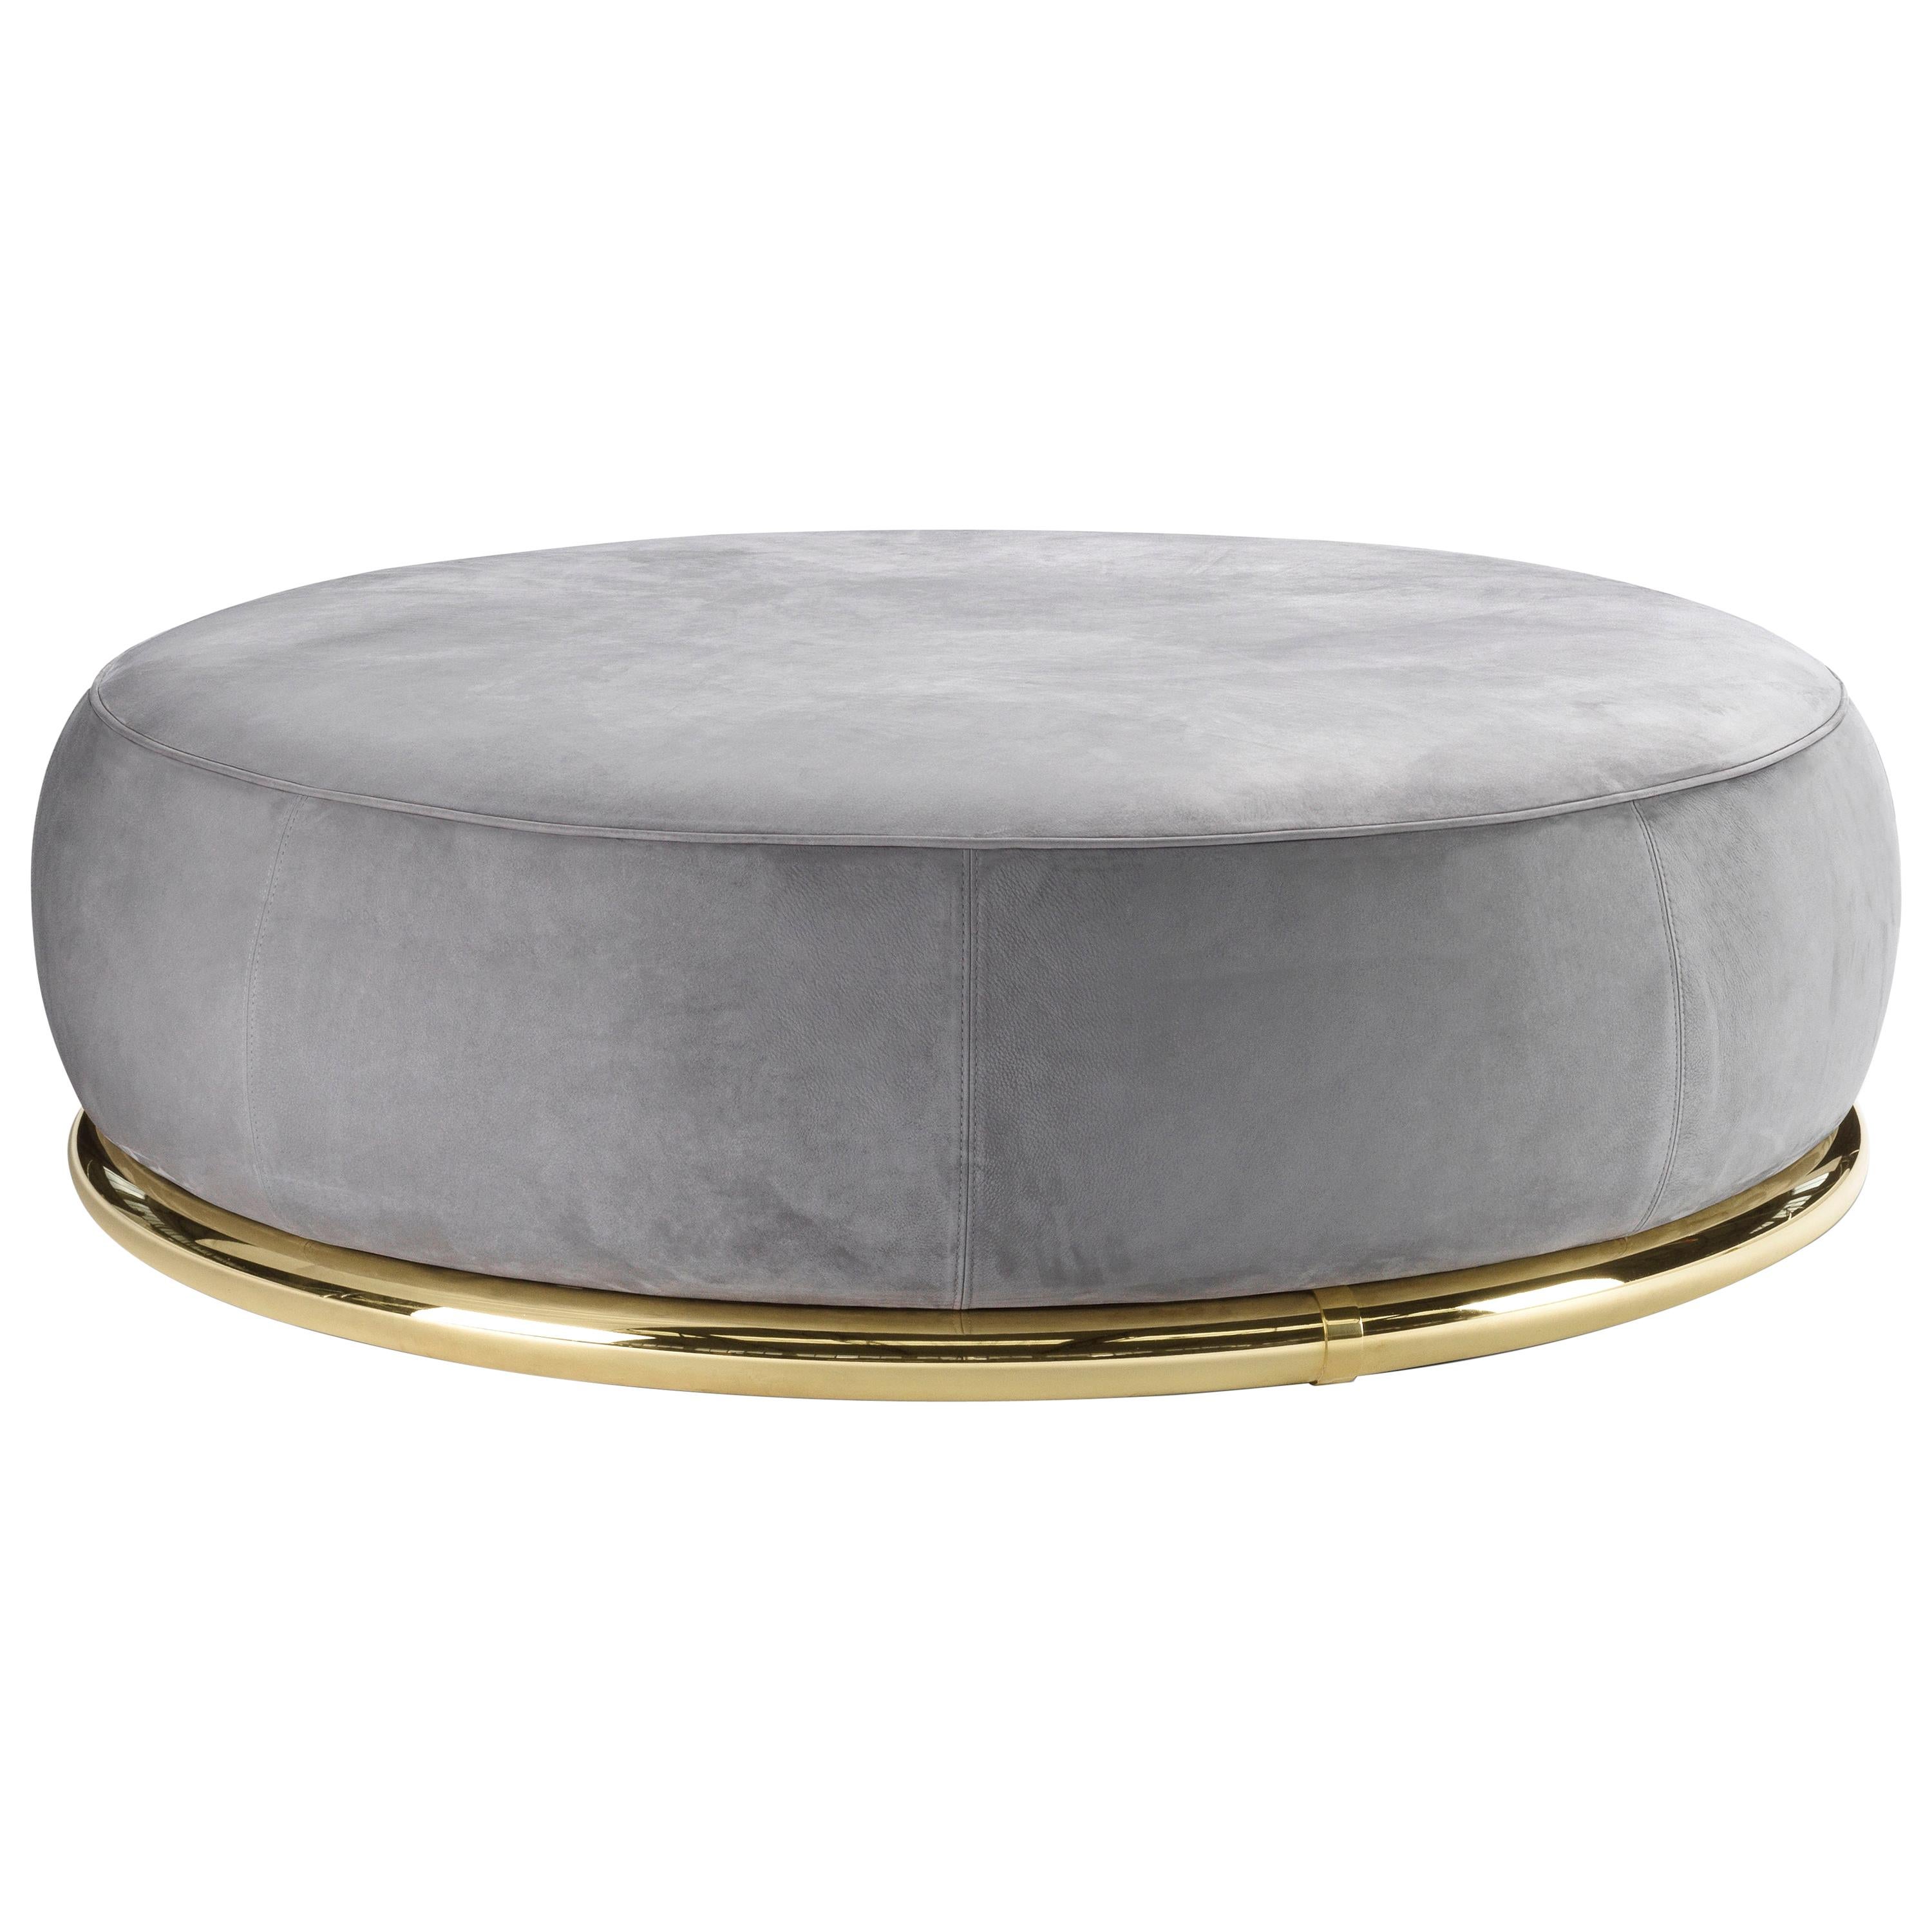 Abbracci Large Ottoman in Grey Leather with Polished Brass Legs